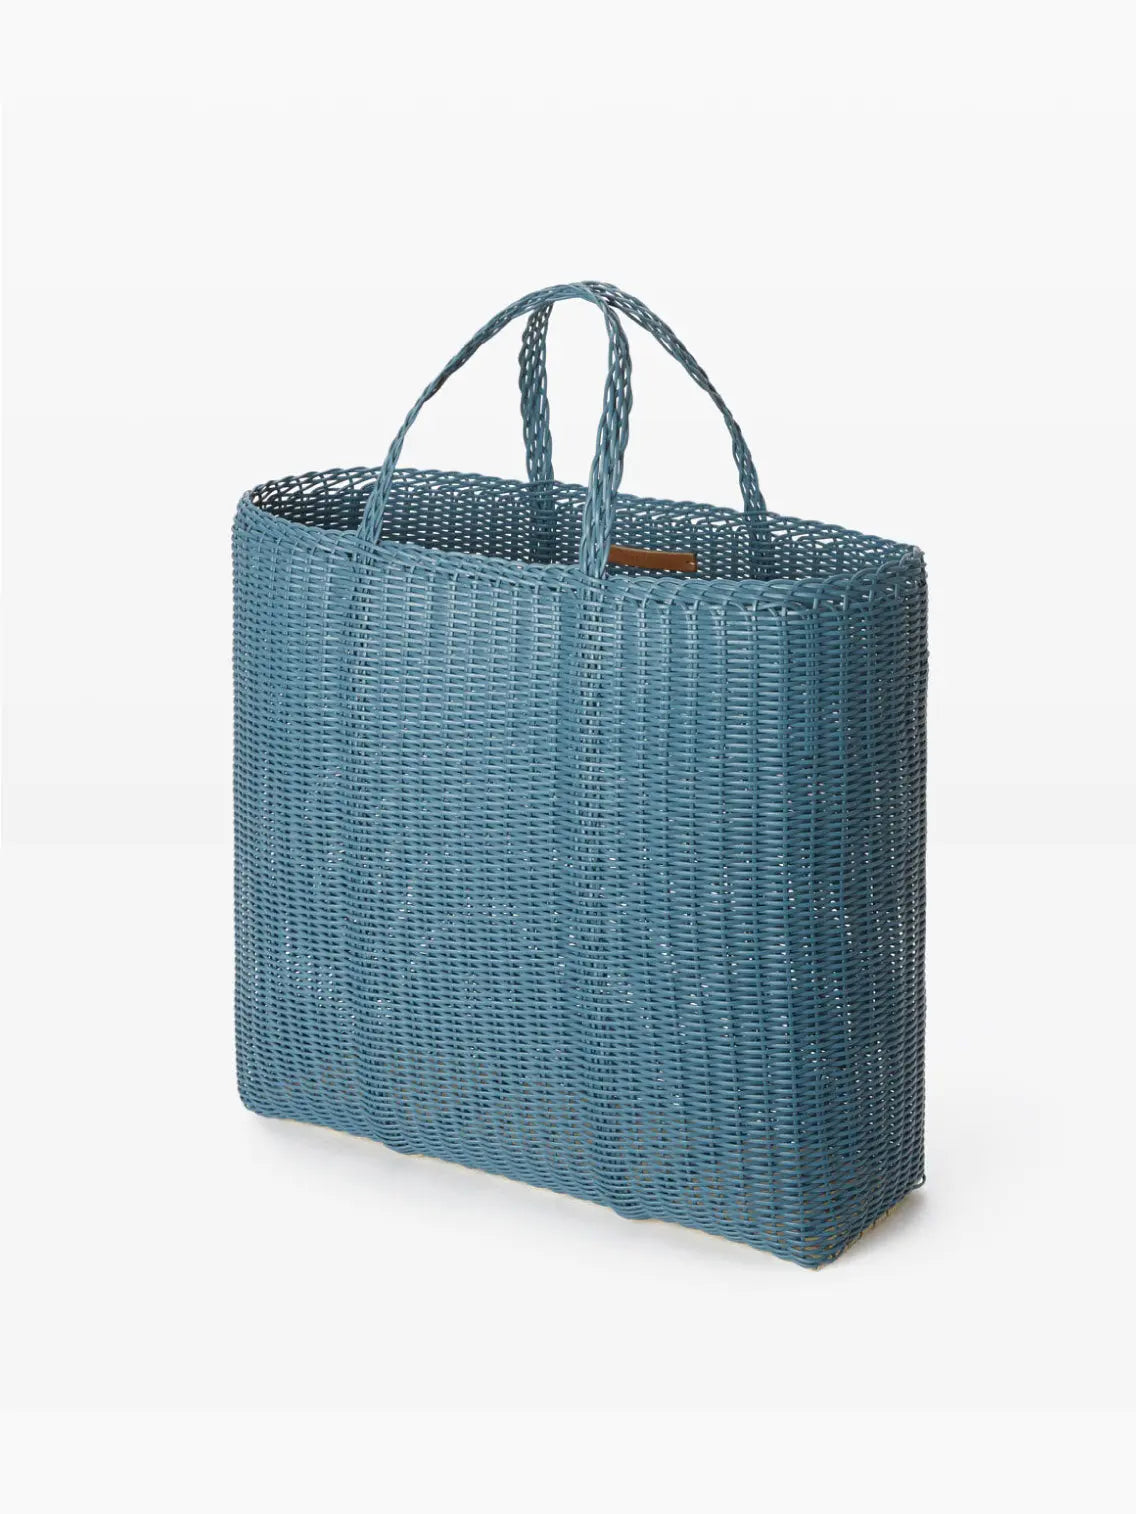 A rectangular, blue woven tote bag with dual handles. The Flat Large Paloblue Bag's woven texture is prominently displayed with vertical and horizontal patterns, giving it a stylish, handcrafted appearance. Available exclusively at Bassalstore in Barcelona, the plain white background emphasizes the bag's design features by Palorosa.